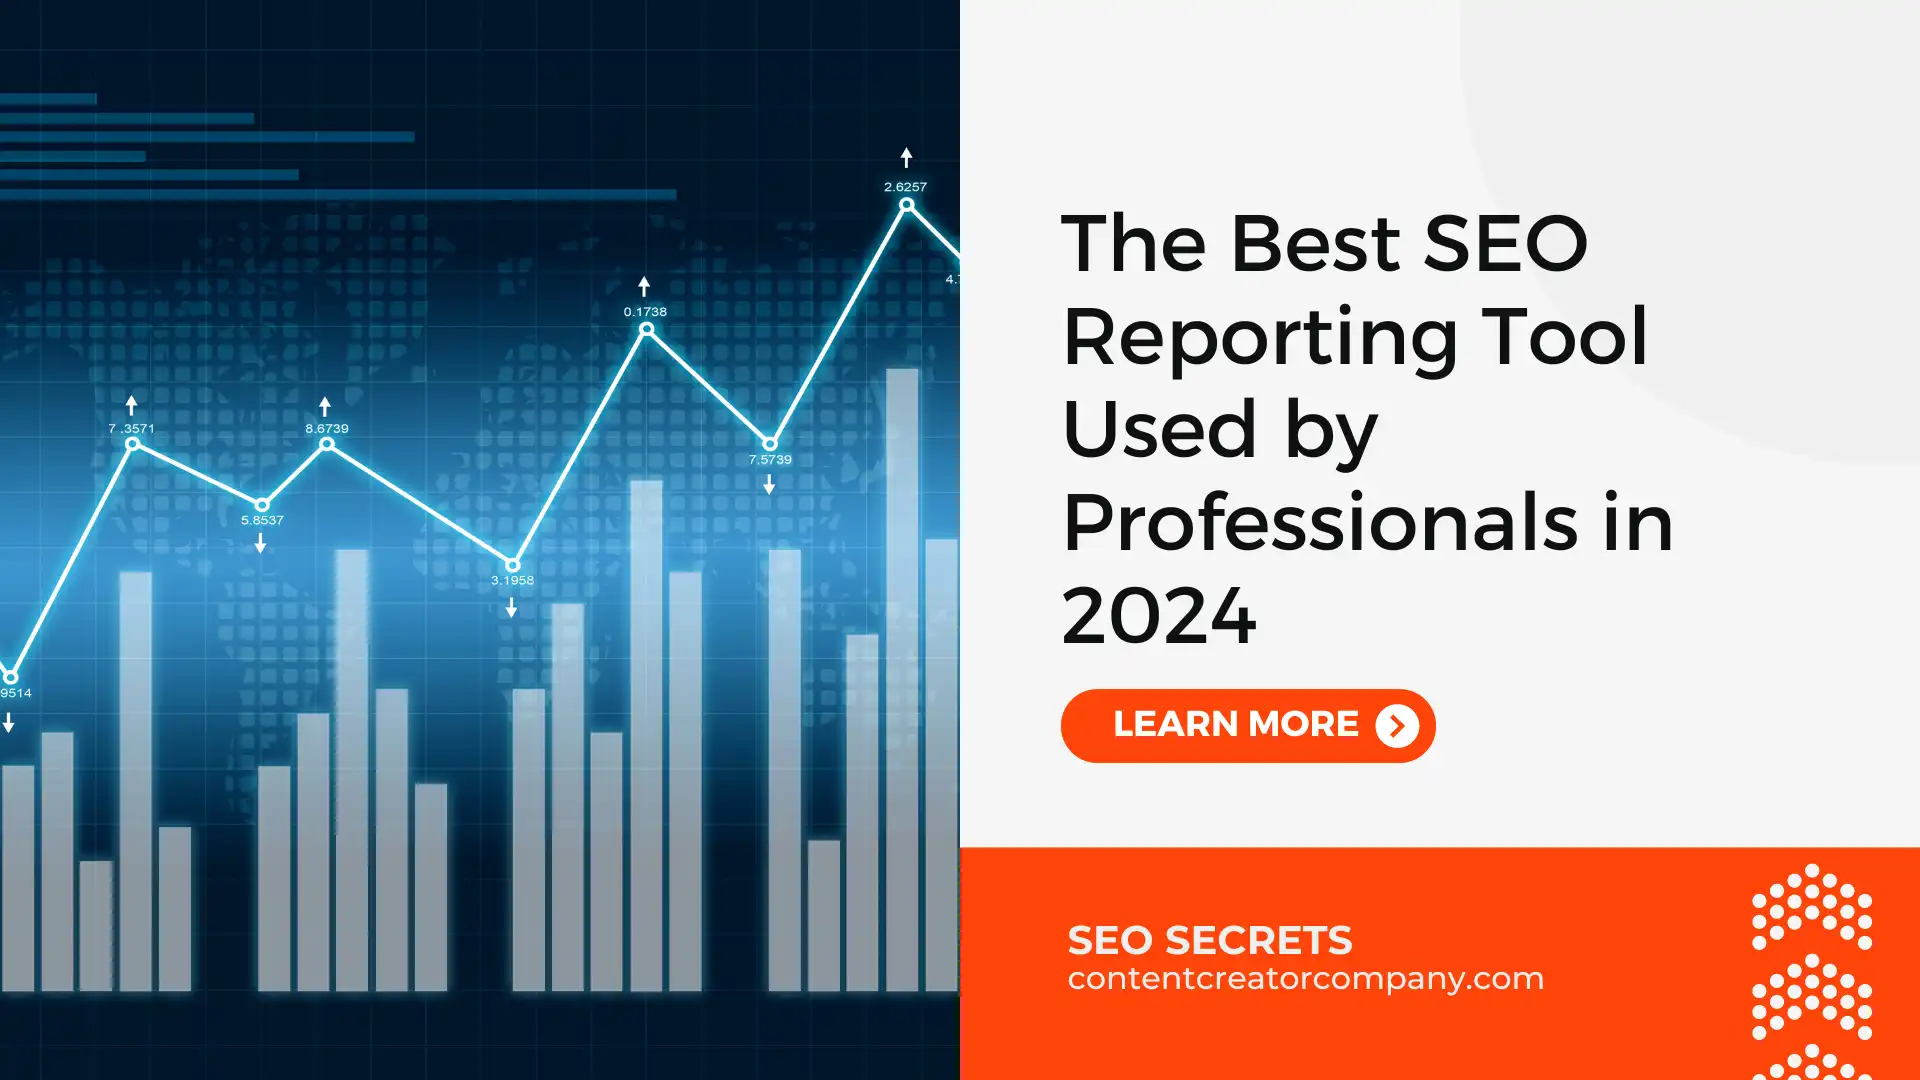 The Best SEO Reporting Tool Used by Professionals in 2024